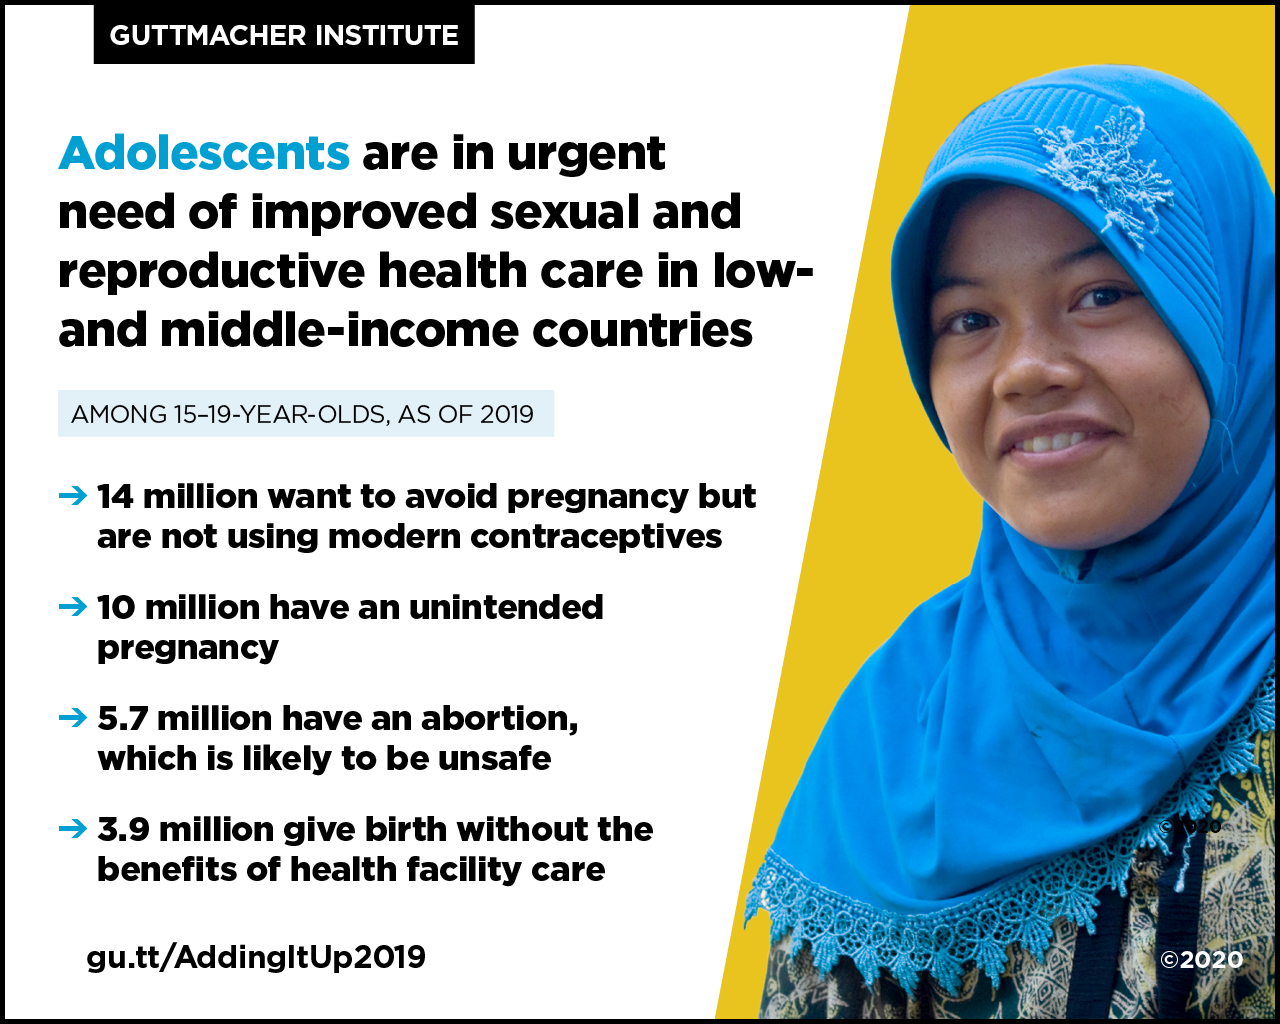 Adolescents are in urgent need of improved sexual and reproductive health care in low- and middle-income countries